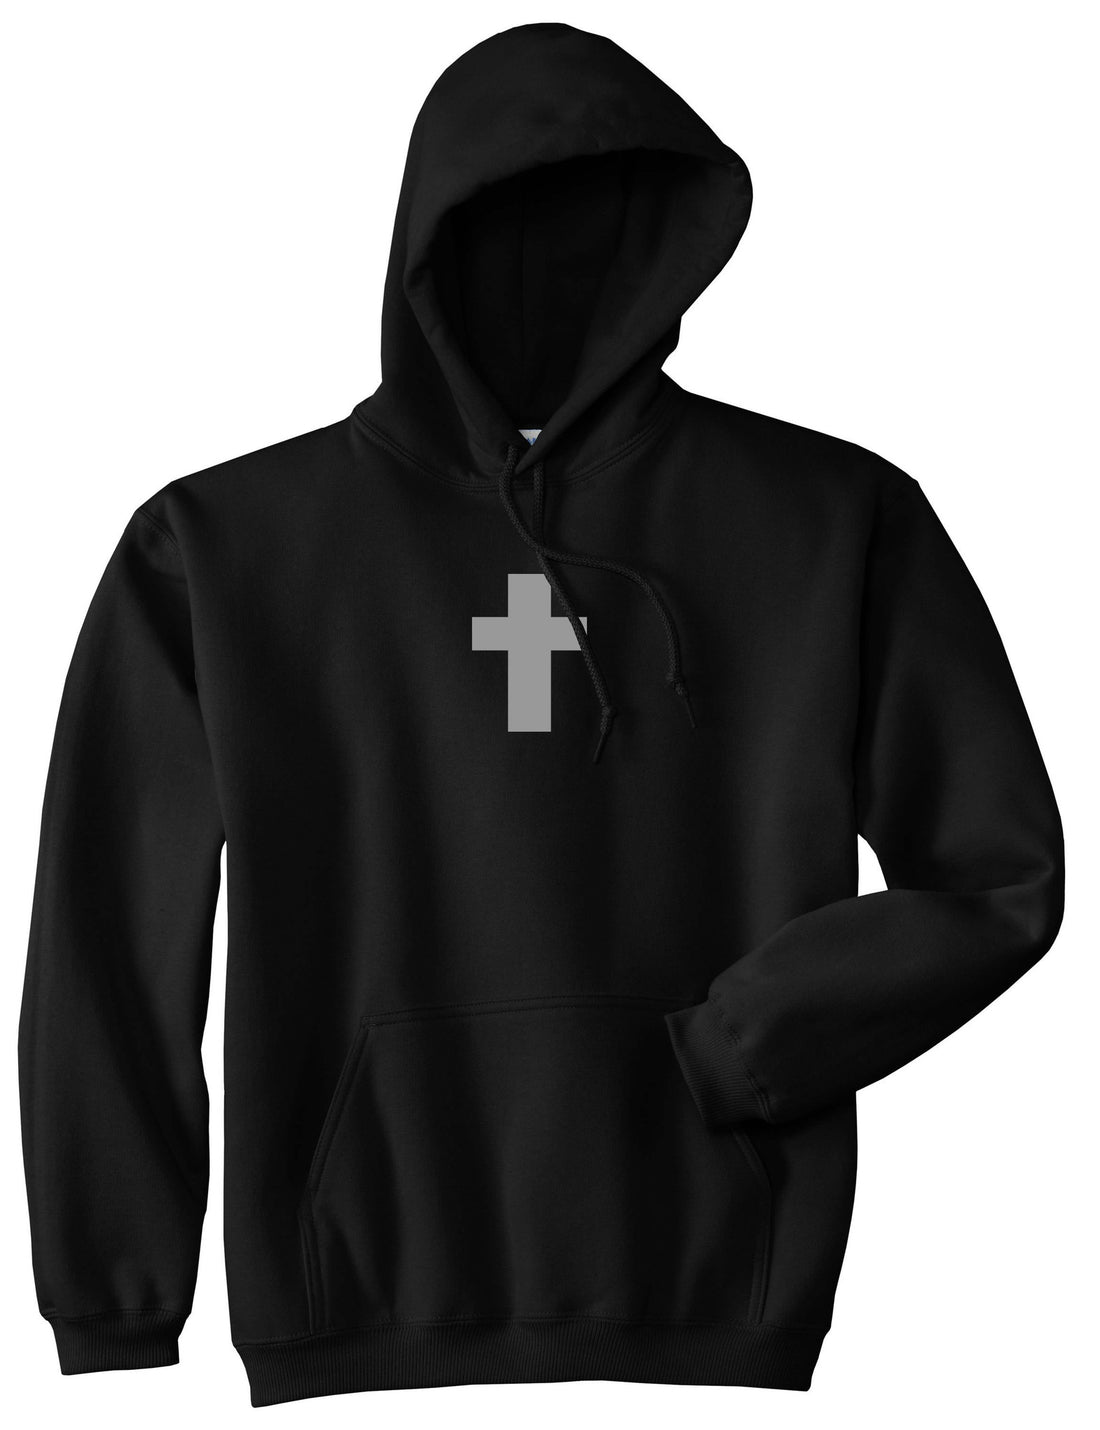 Small Cross Pullover Hoodie